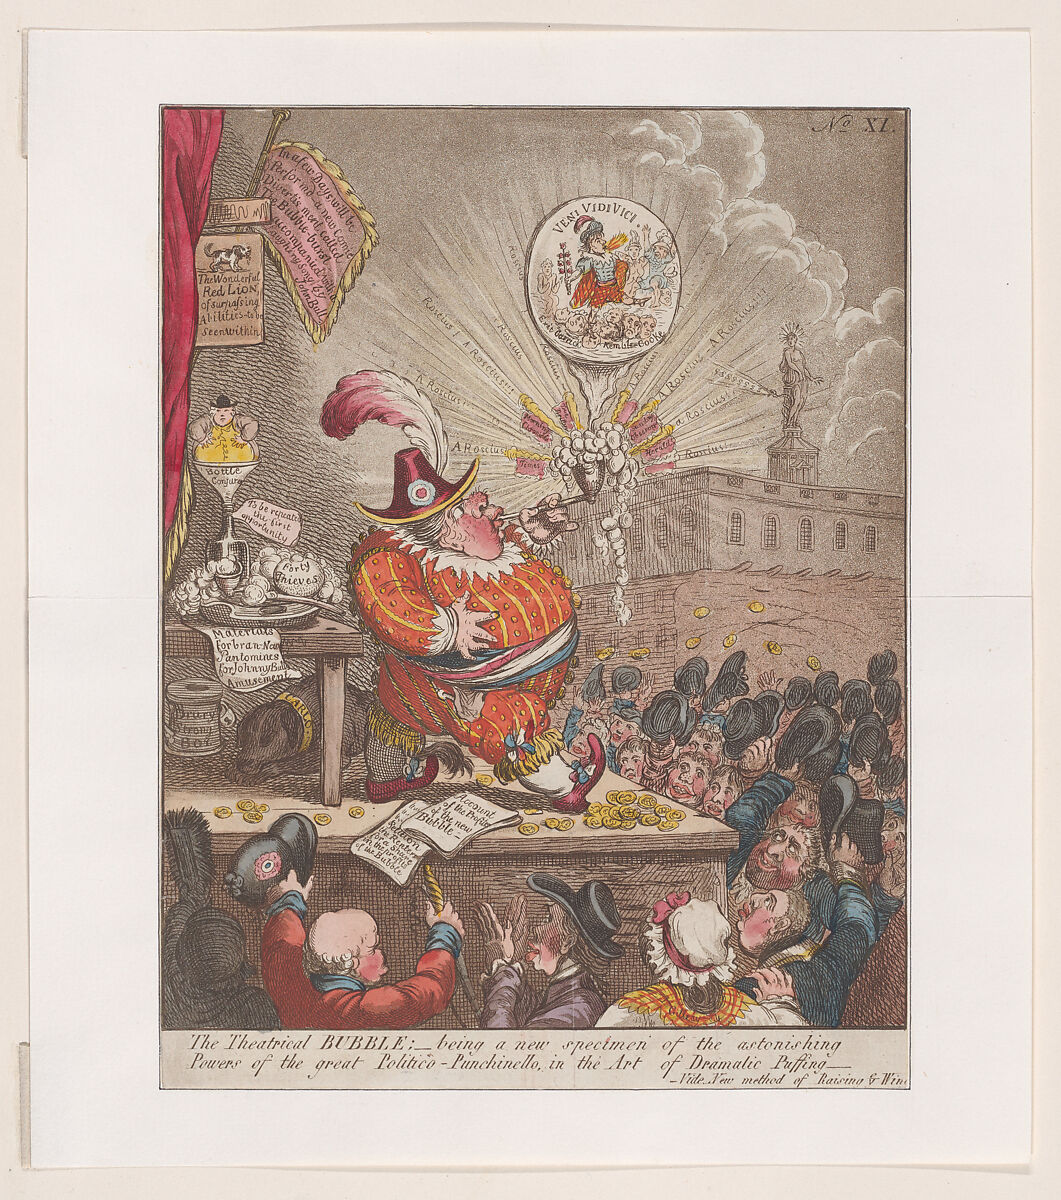 The Theatrical Bubble; being a new Specimen of the Astonishing Powers of the Great Politiico-Punchinello in the Art of Dramatic Puffing, After James Gillray (British, London 1756–1815 London), Hand-colored etching 